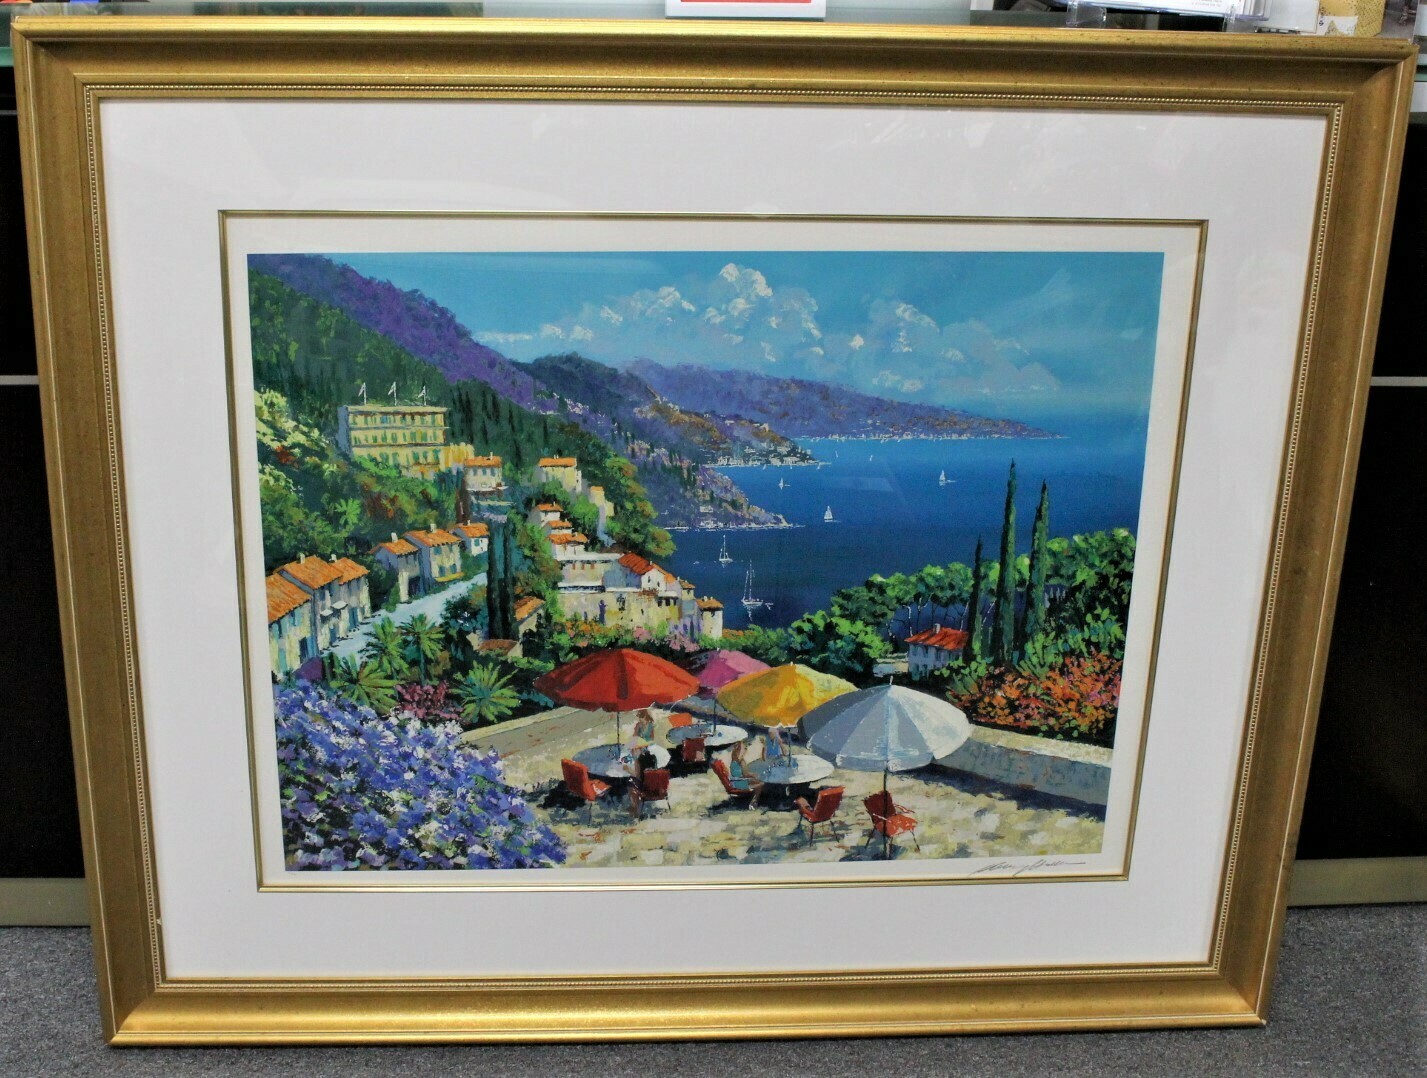 Kerry Hallam "Hills of Posillipo" 53 x 44 Framed Serigraph Hand Signed 121/200